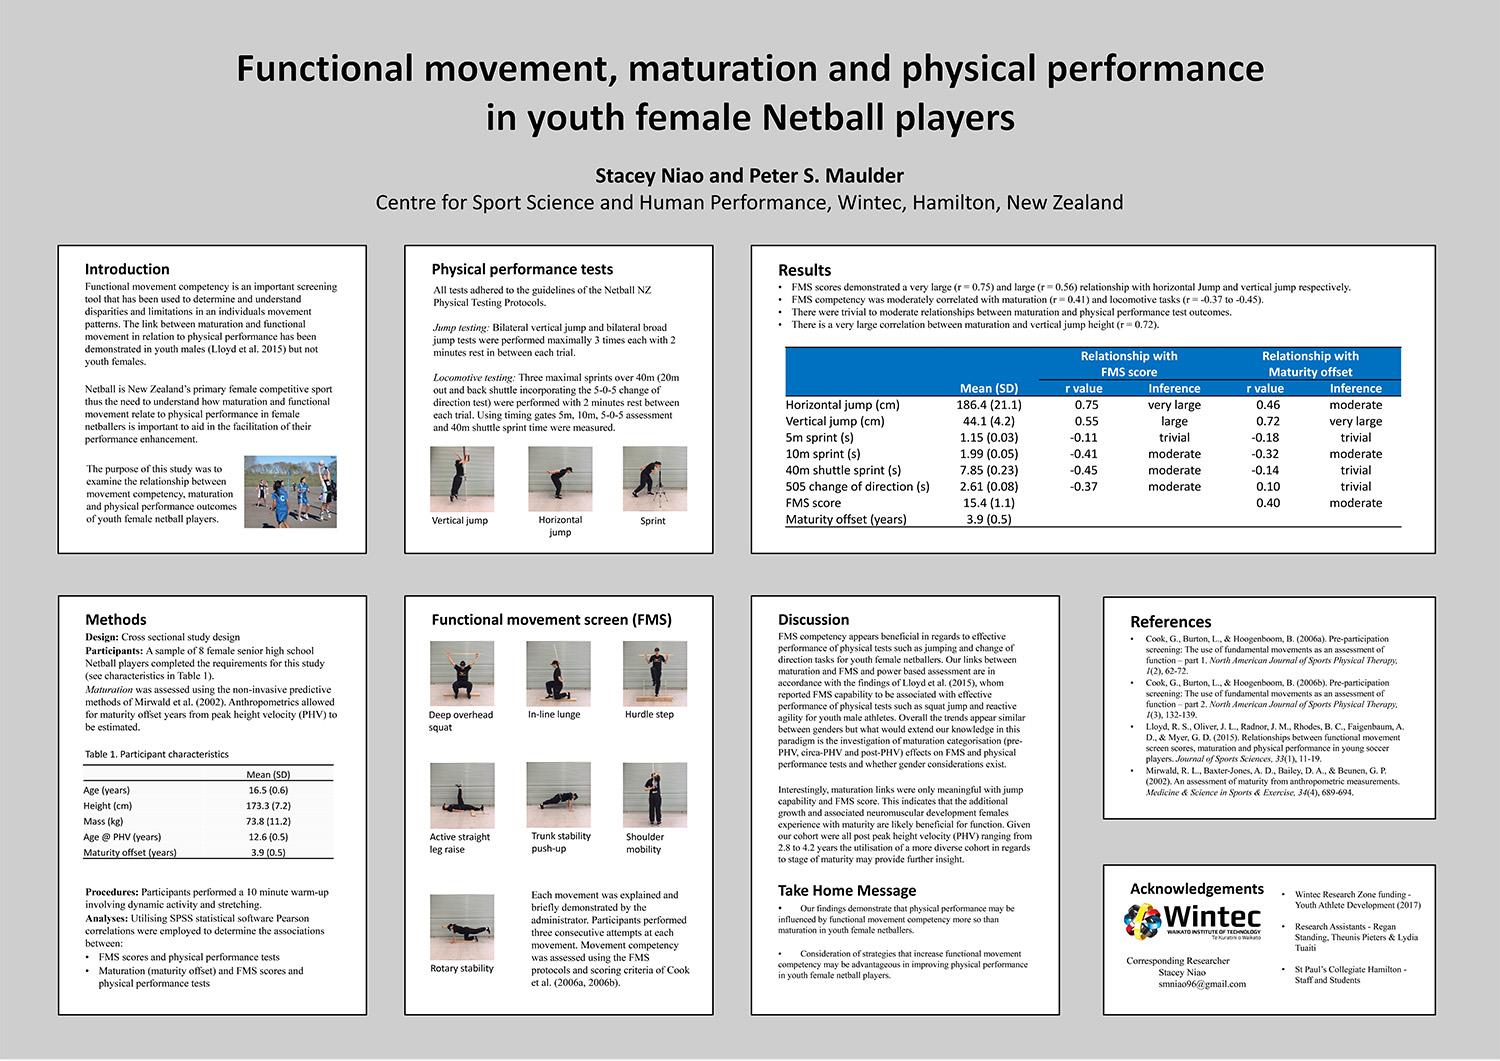 Functional movement, maturation and physical performance in youth female Netball players